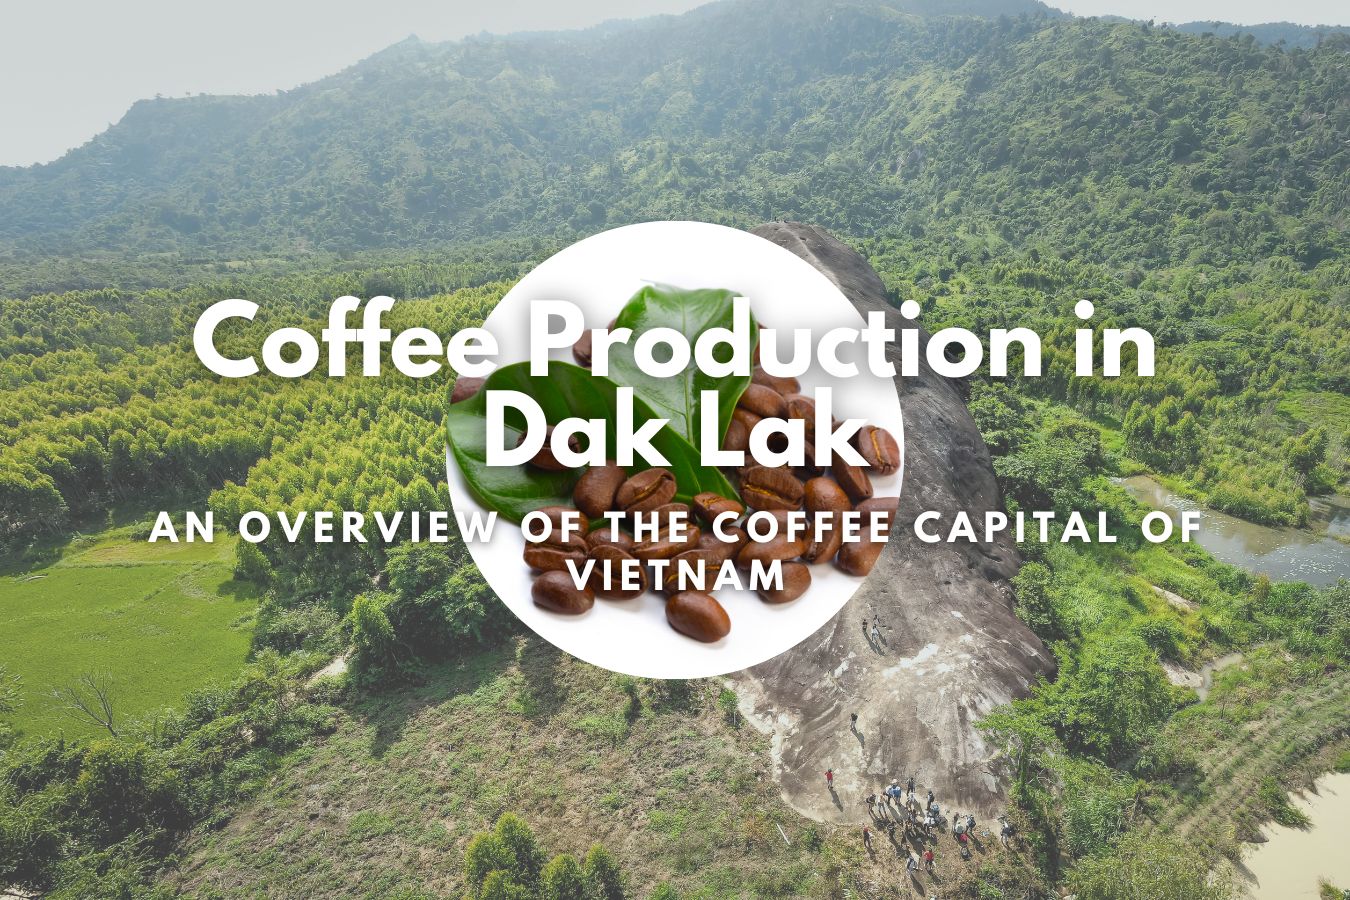 Coffee Production in Dak Lak An Overview of the Coffee Capital of Vietnam